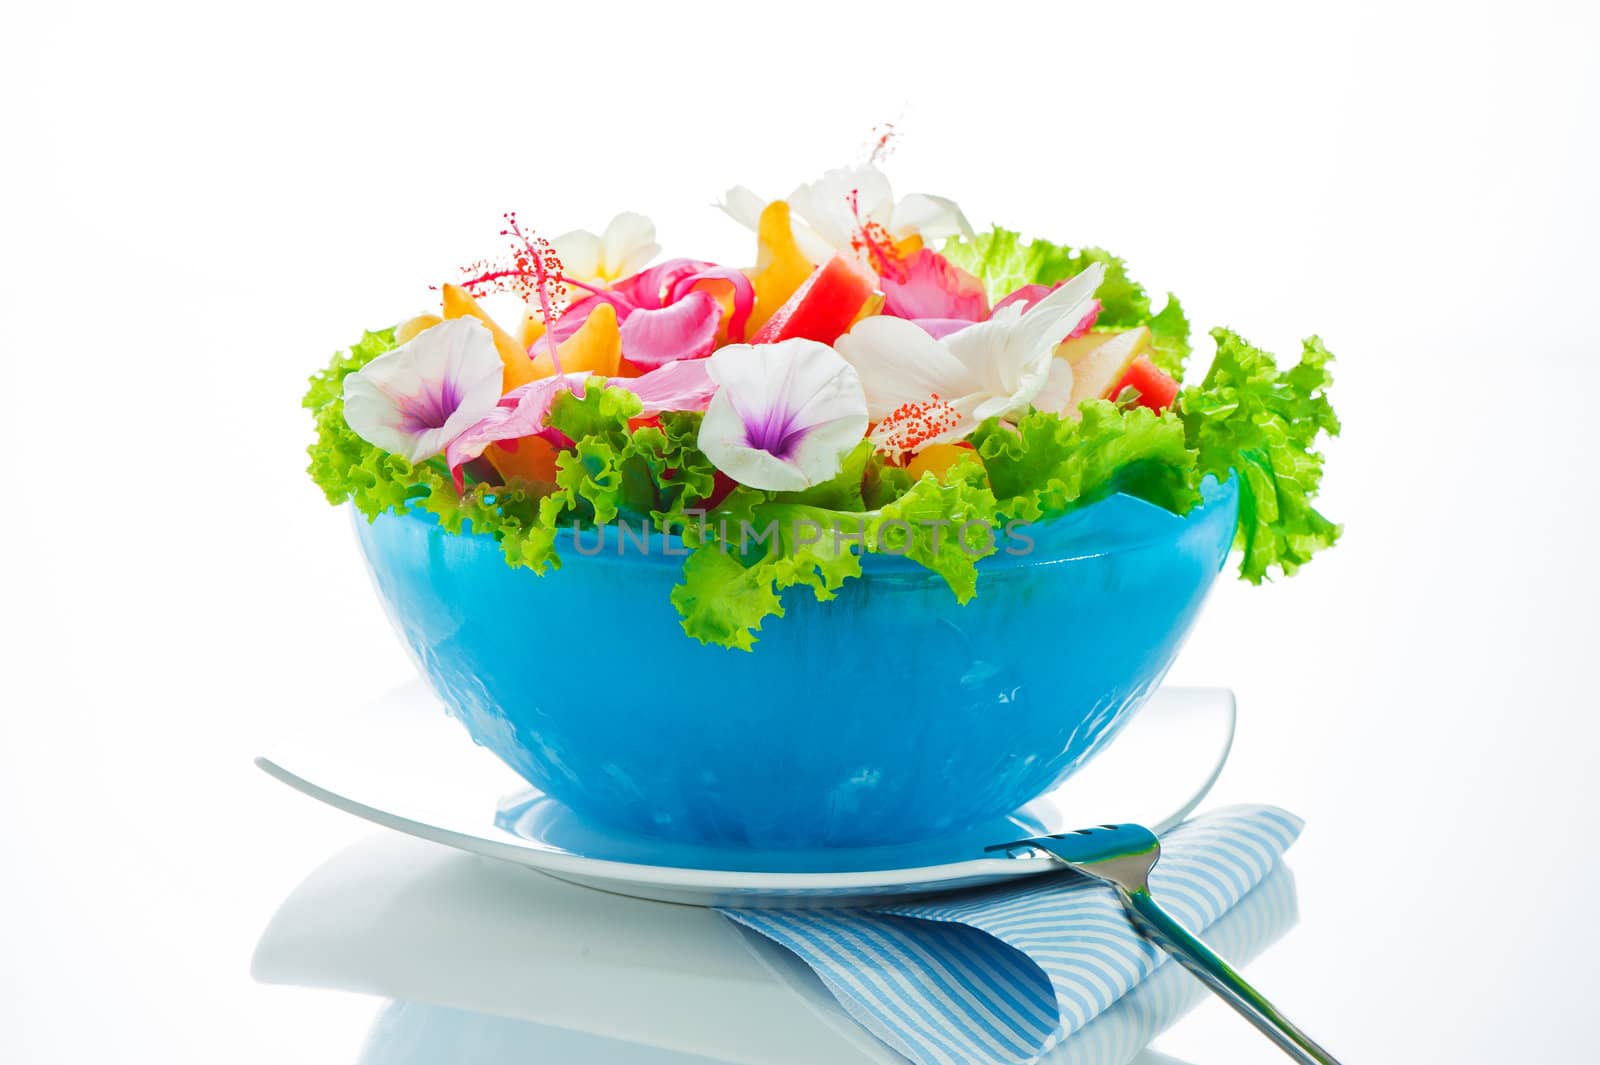 Fruit salad with edible flowers in a blue bowl from ice on white background